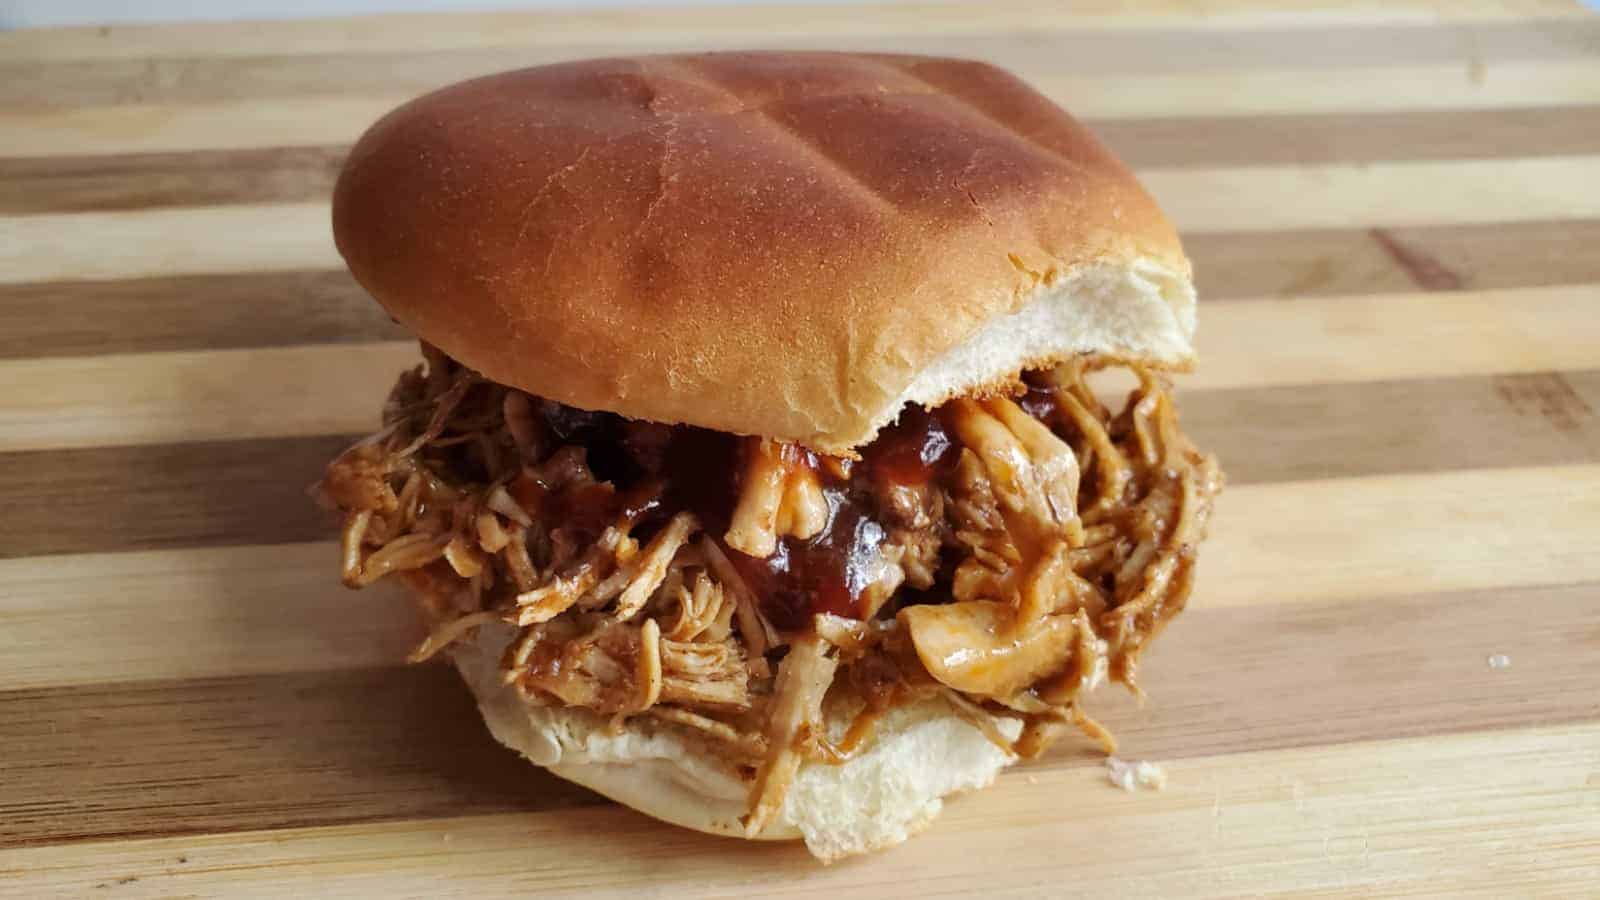 Image shows a BBQ shredded chicken sandwich on a wooden board.